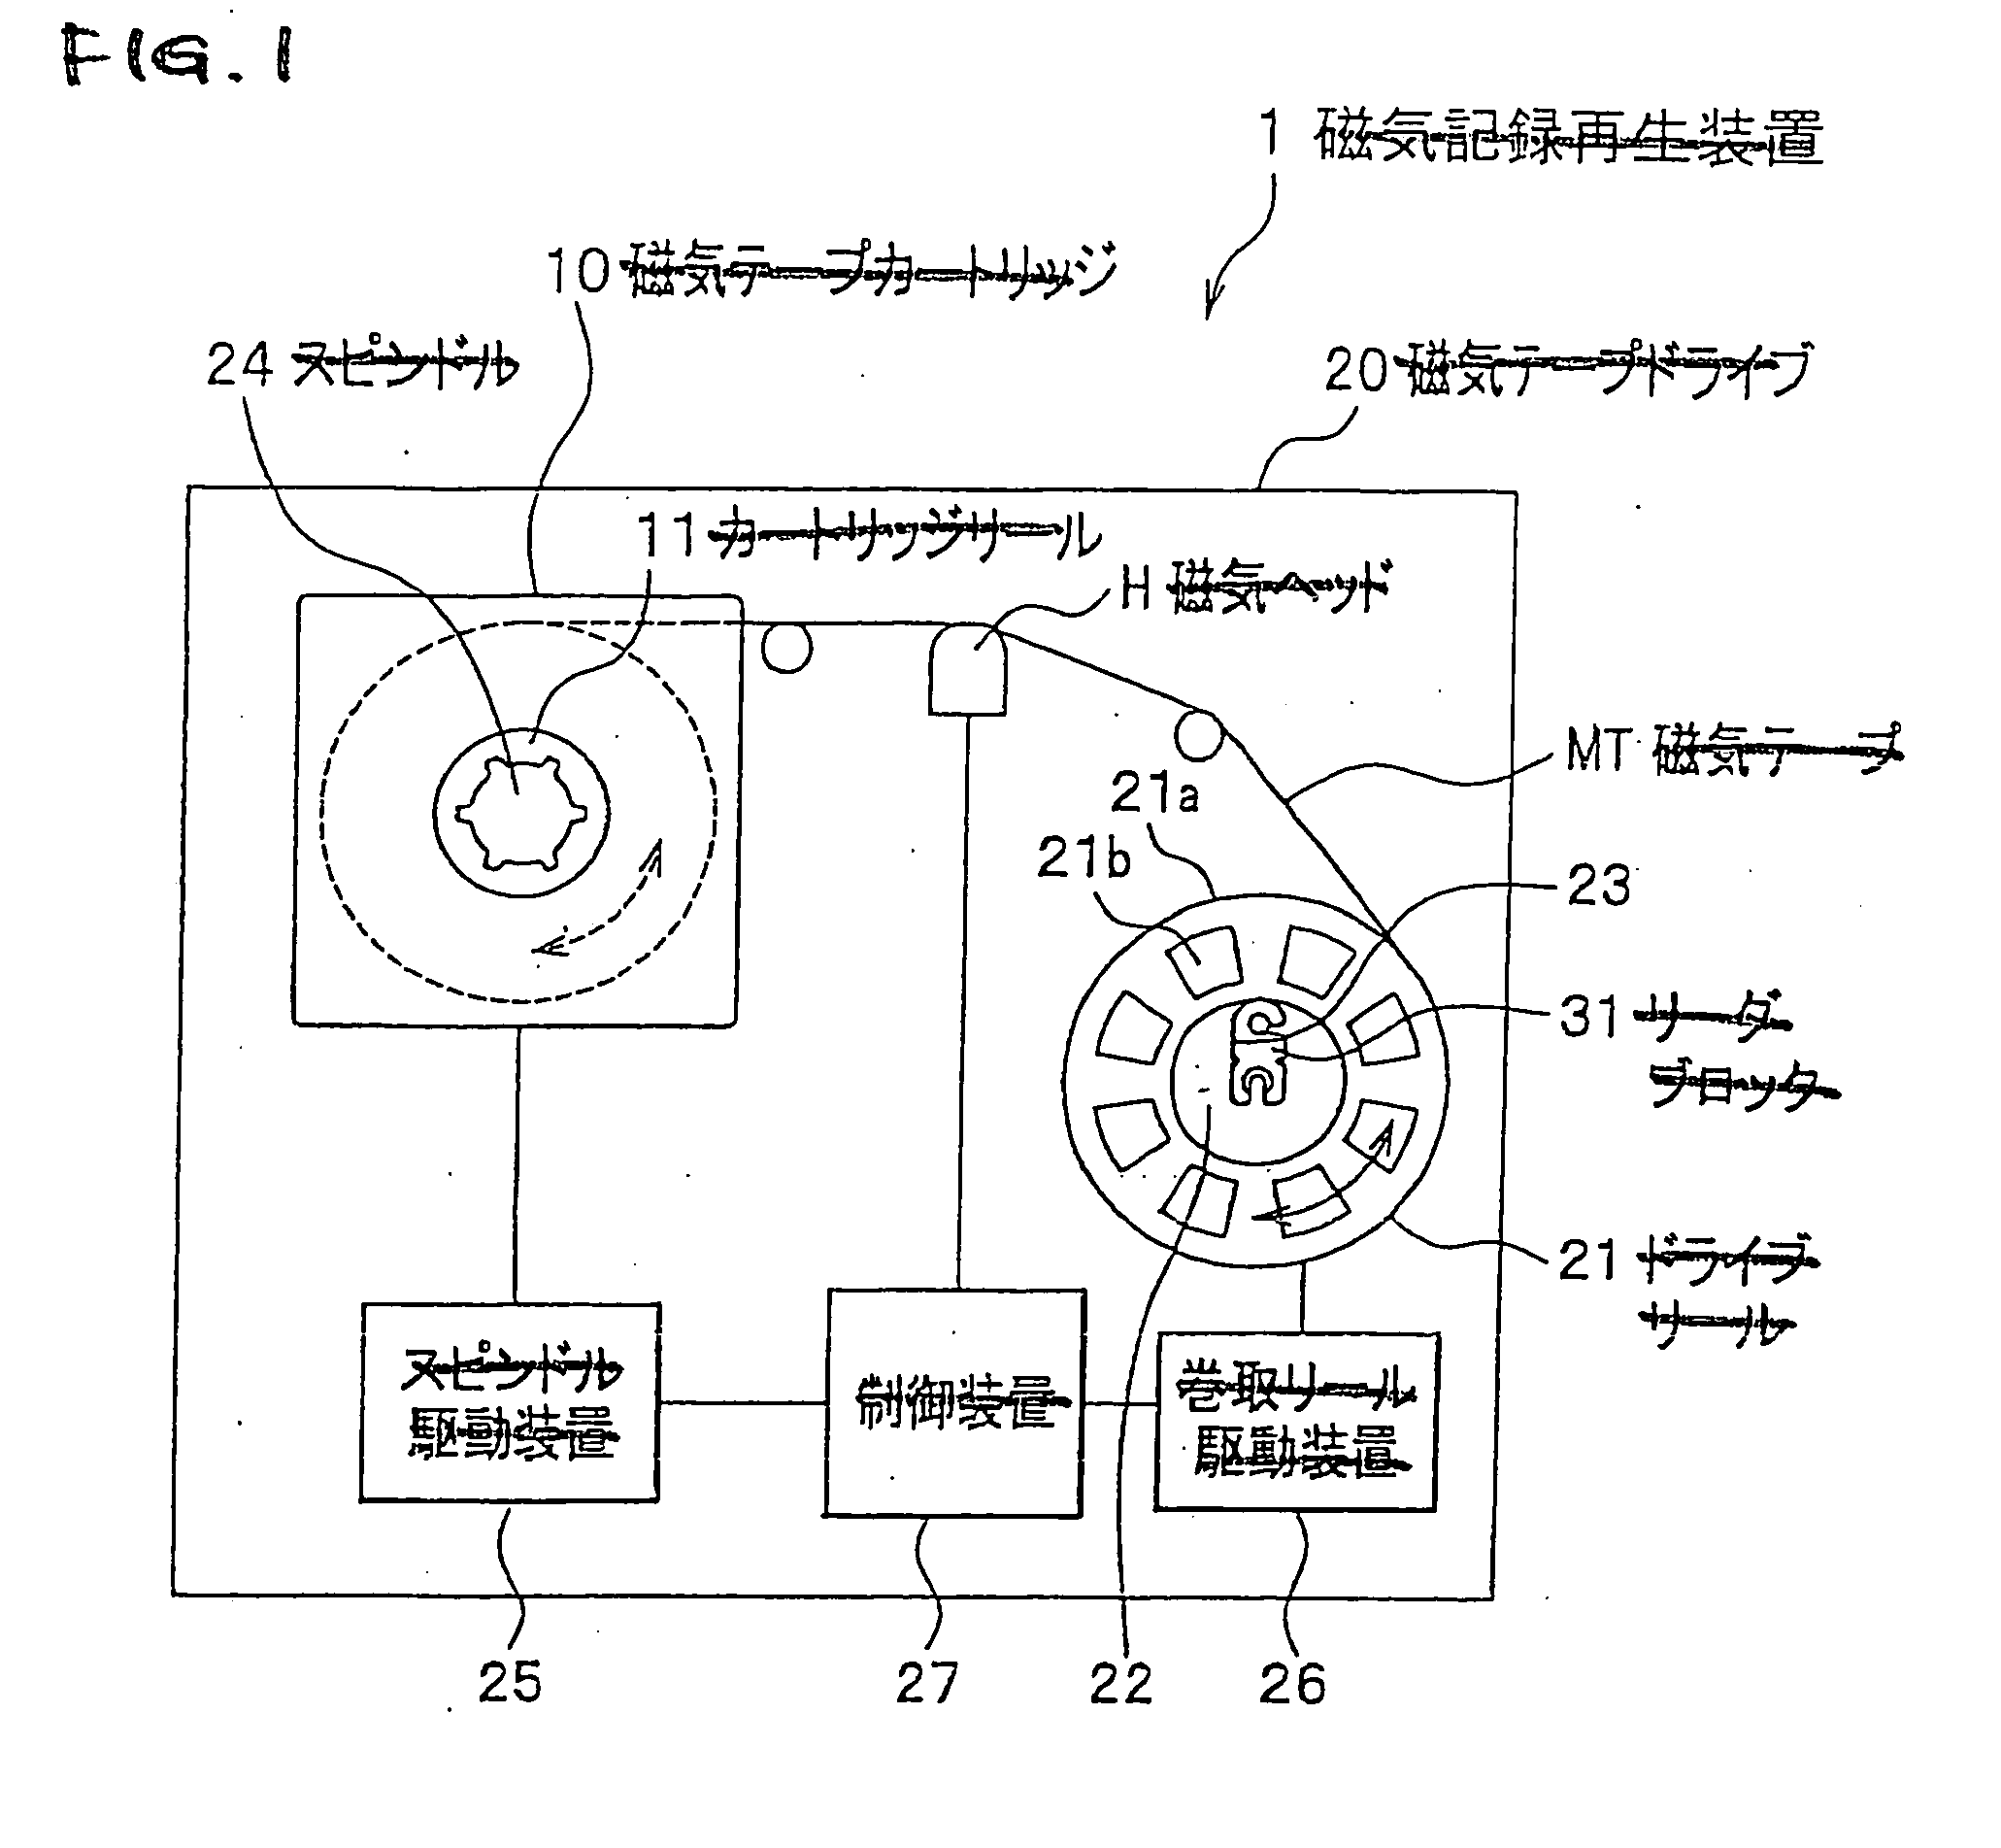 Leader tape and magnetic tape cartridge using the same